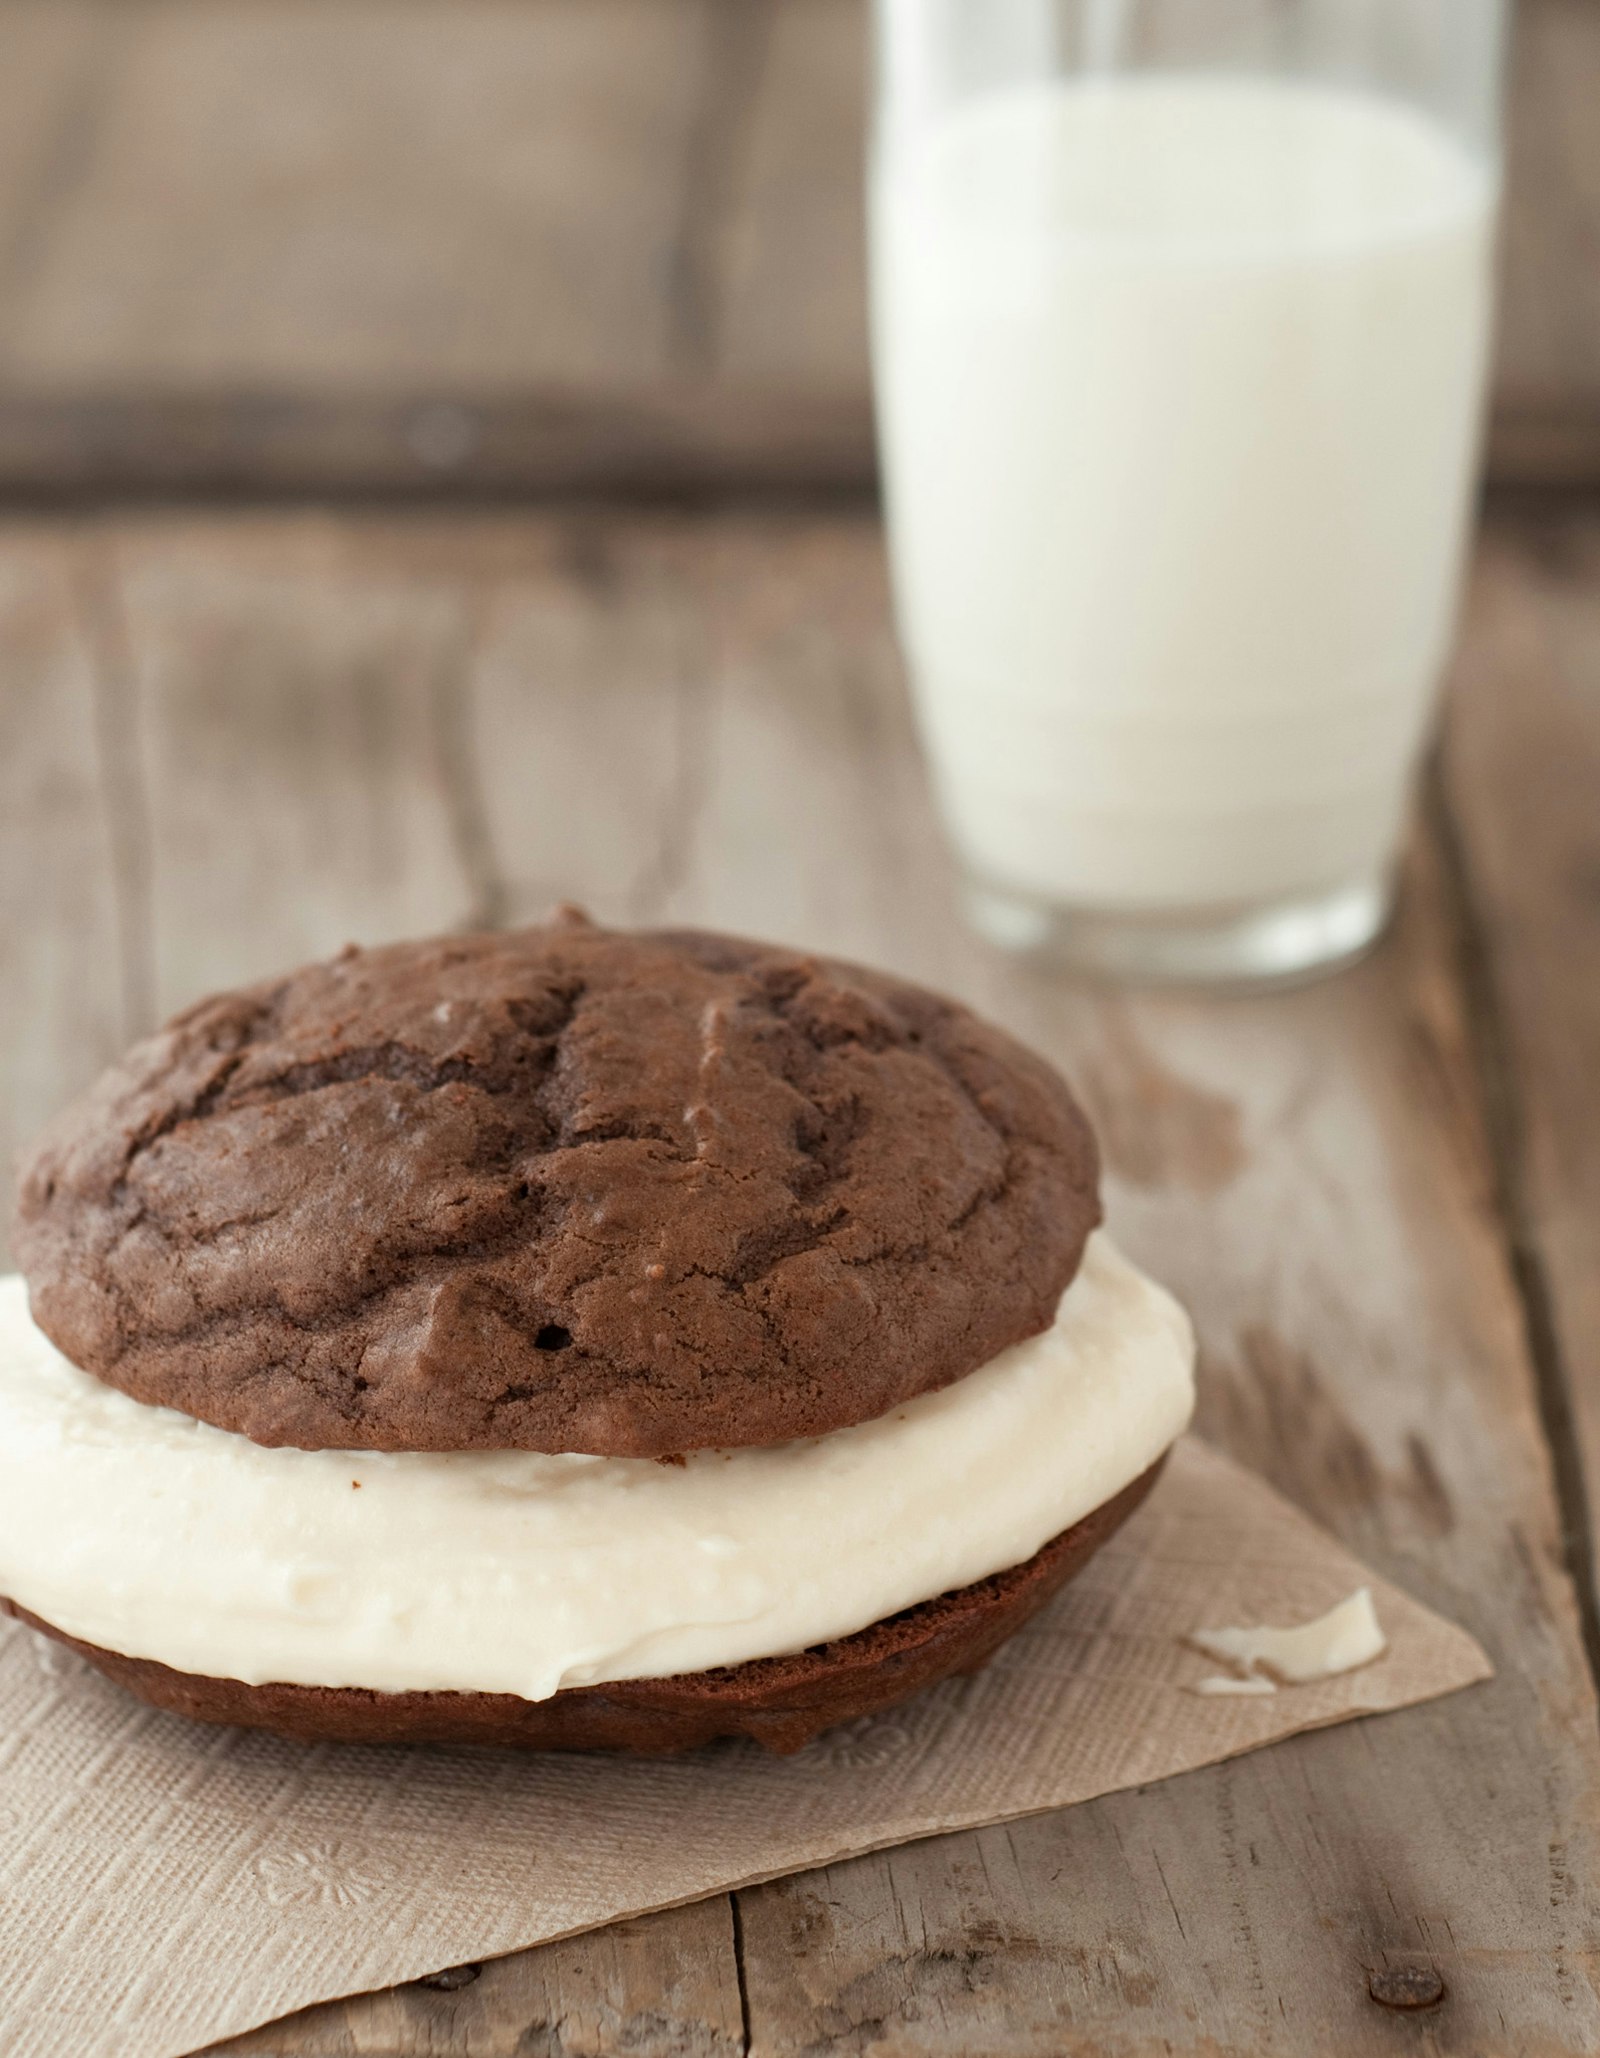 a black whoopie pie with white filling and a glass of milk